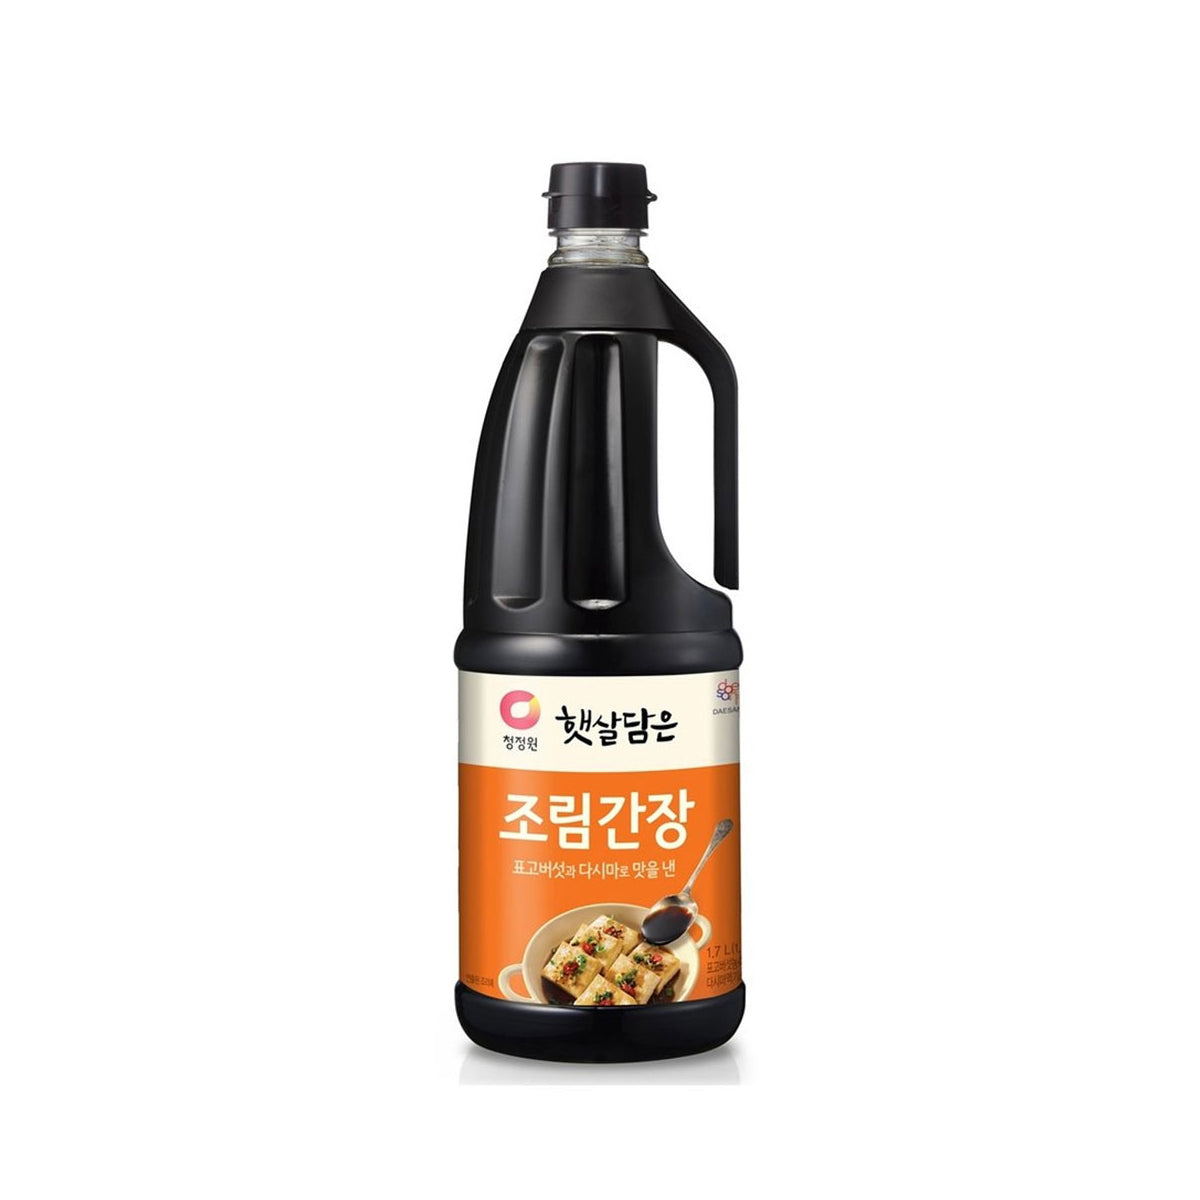 Soy Sauc for stewing  8/1.7L 햇살담은 자연숙성 조림간장